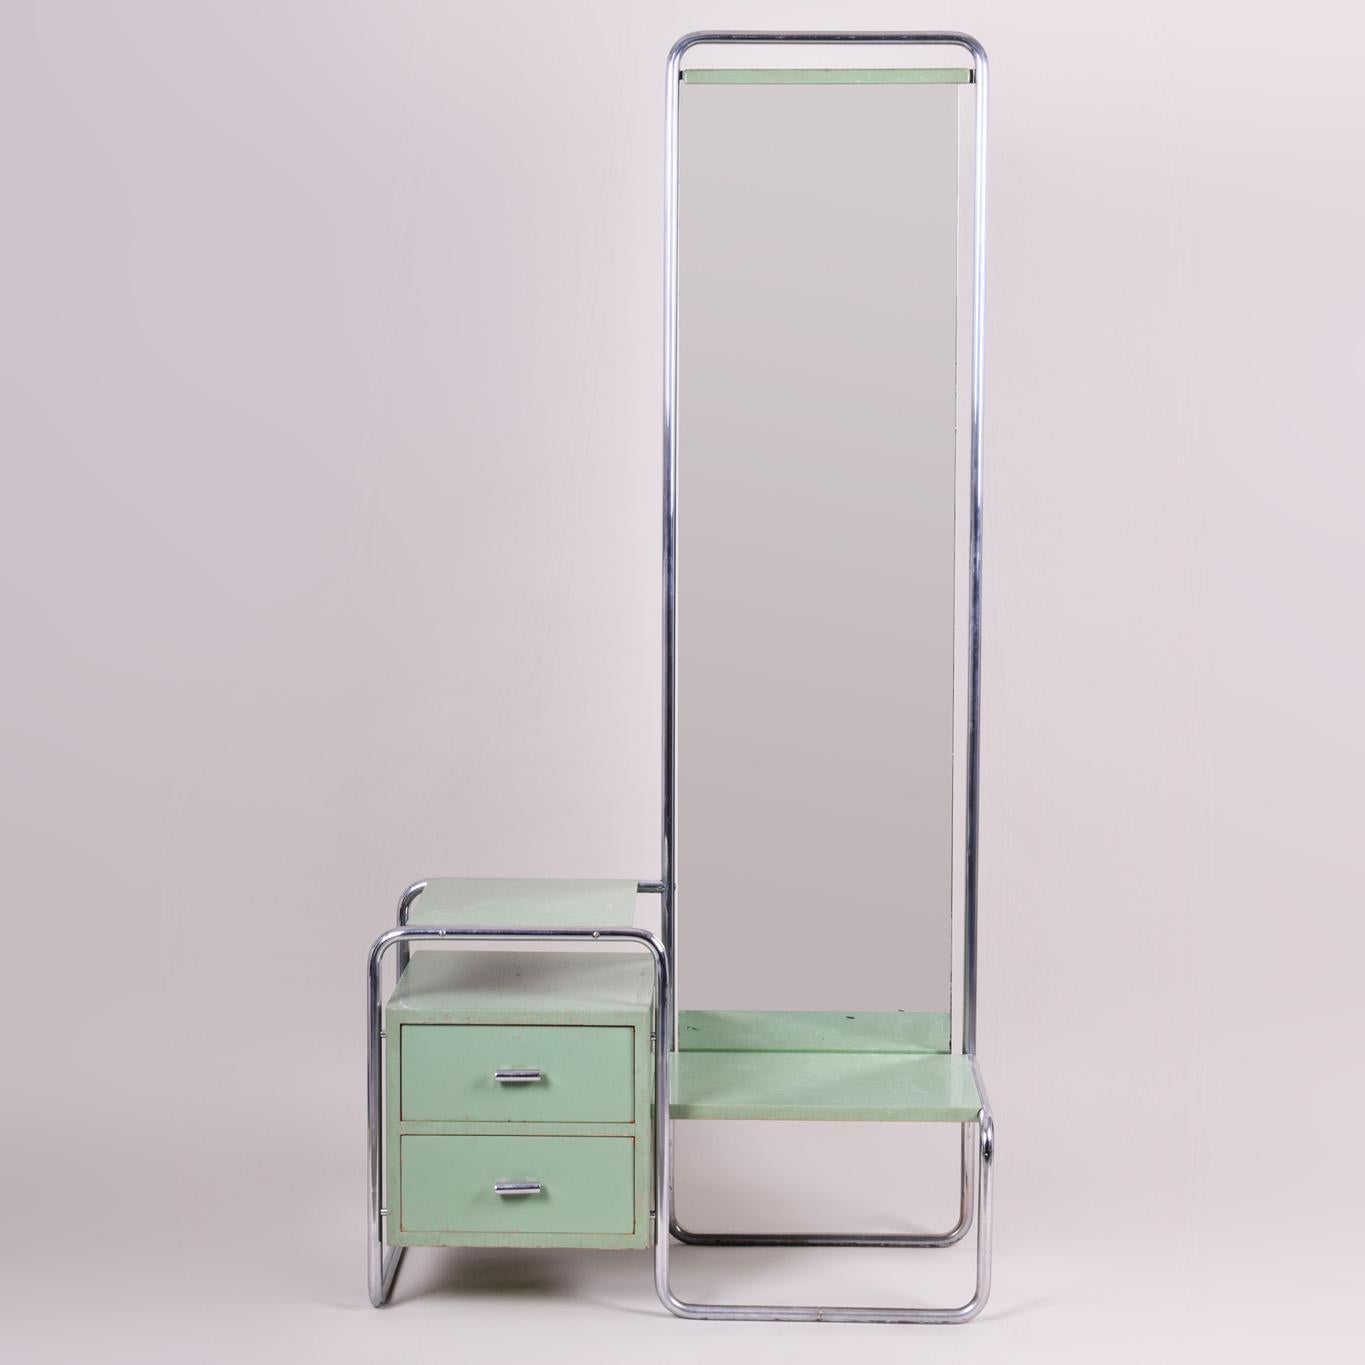 Green bauhaus dressing mirror made in Czechia in the 1930s. The mirror is completely original and has not been restored, it´s in pristine original condition.